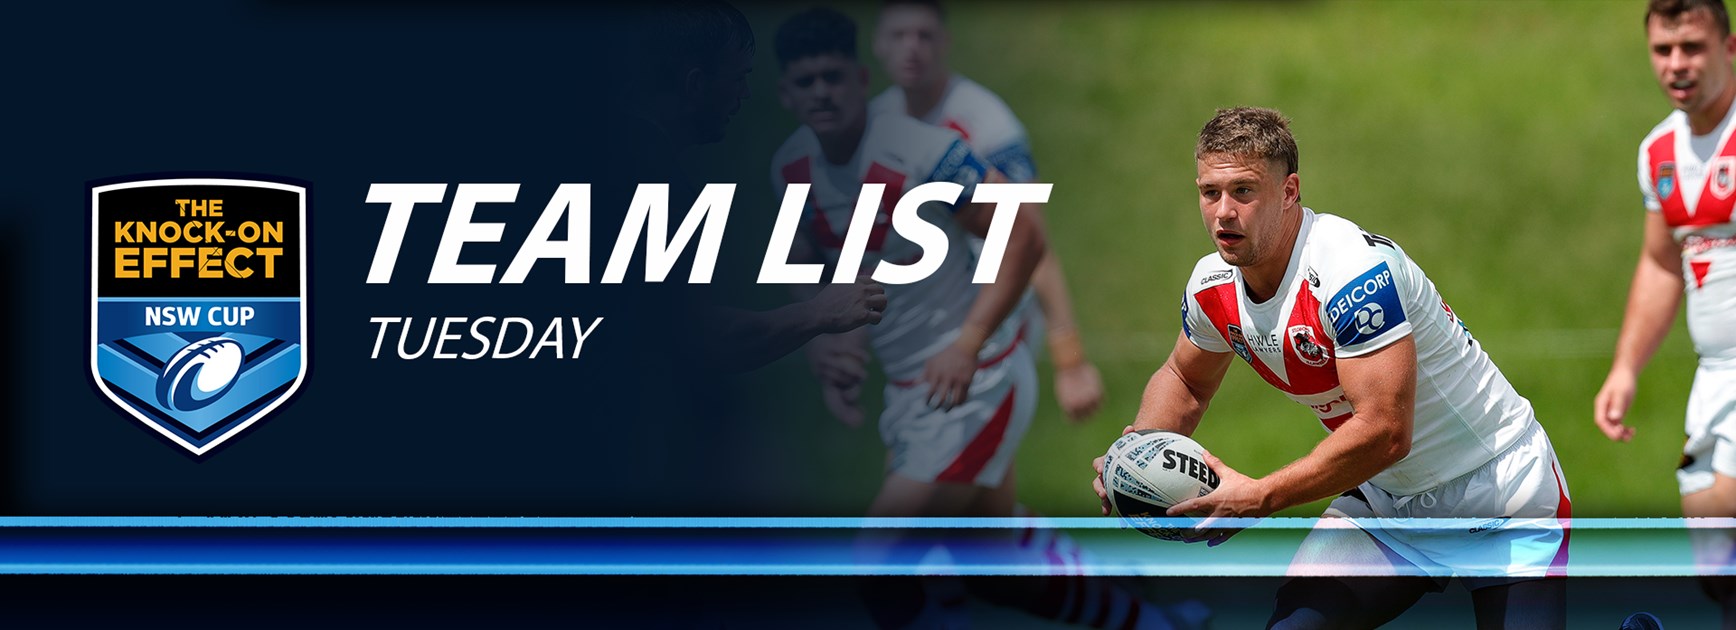 Team List Tuesday | The Knock-On Effect NSW Cup Rd 3